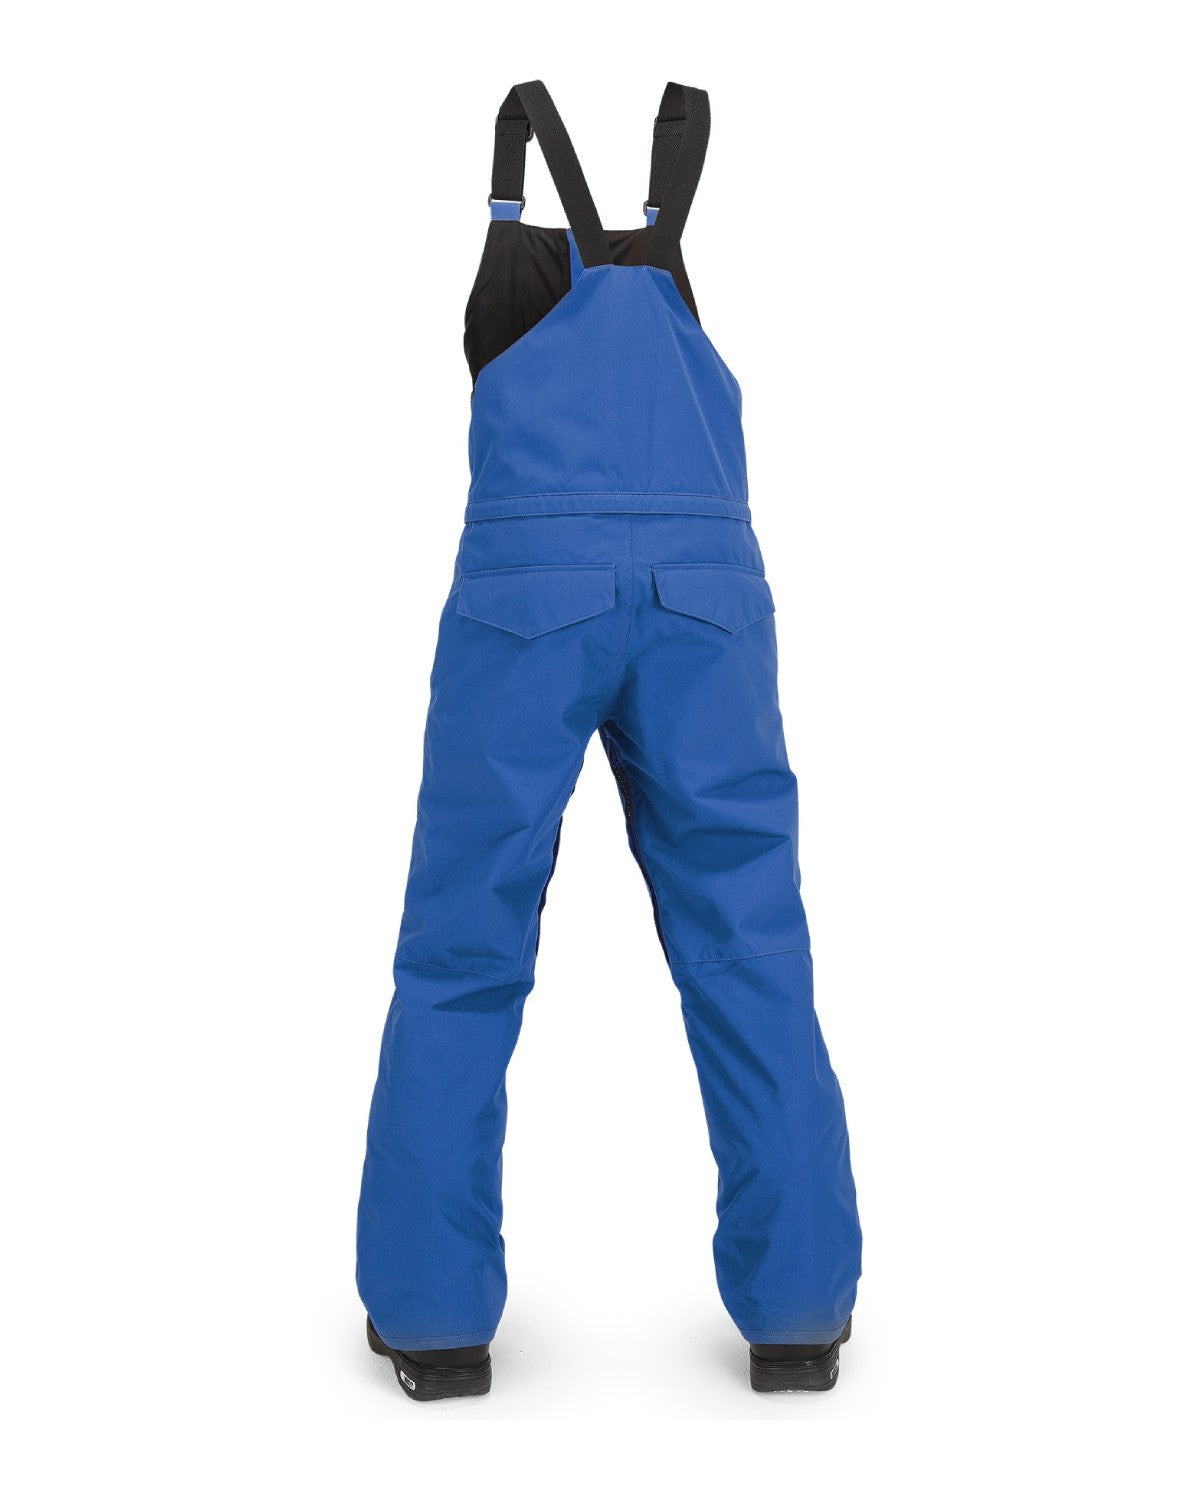 Volcom Kids Barkley Insulated Bib Overall in Electric Blue (Ages 6 - 14)